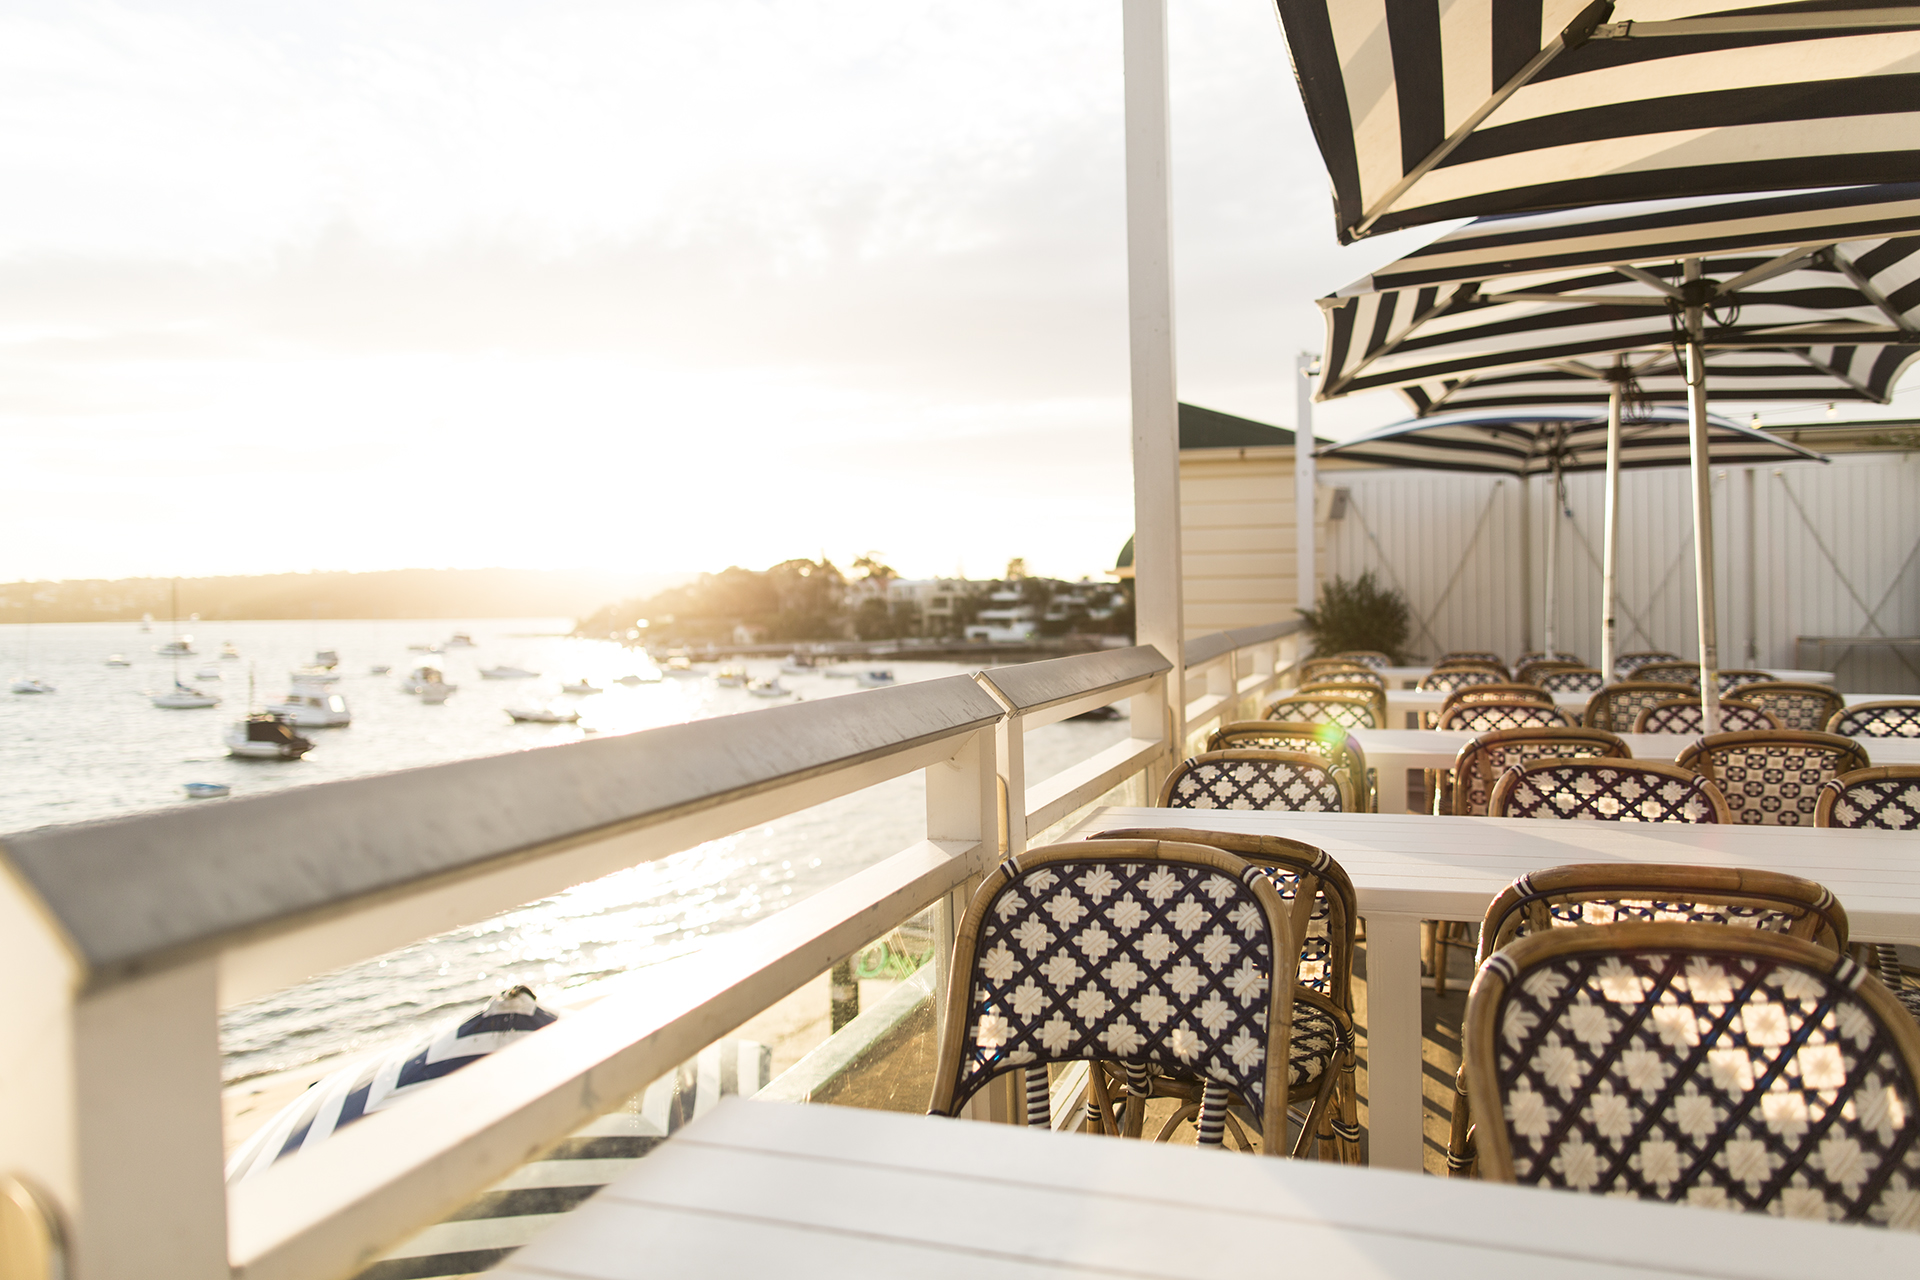 Watsons Bay Boutique Hotel | Mid Deck at Sunset